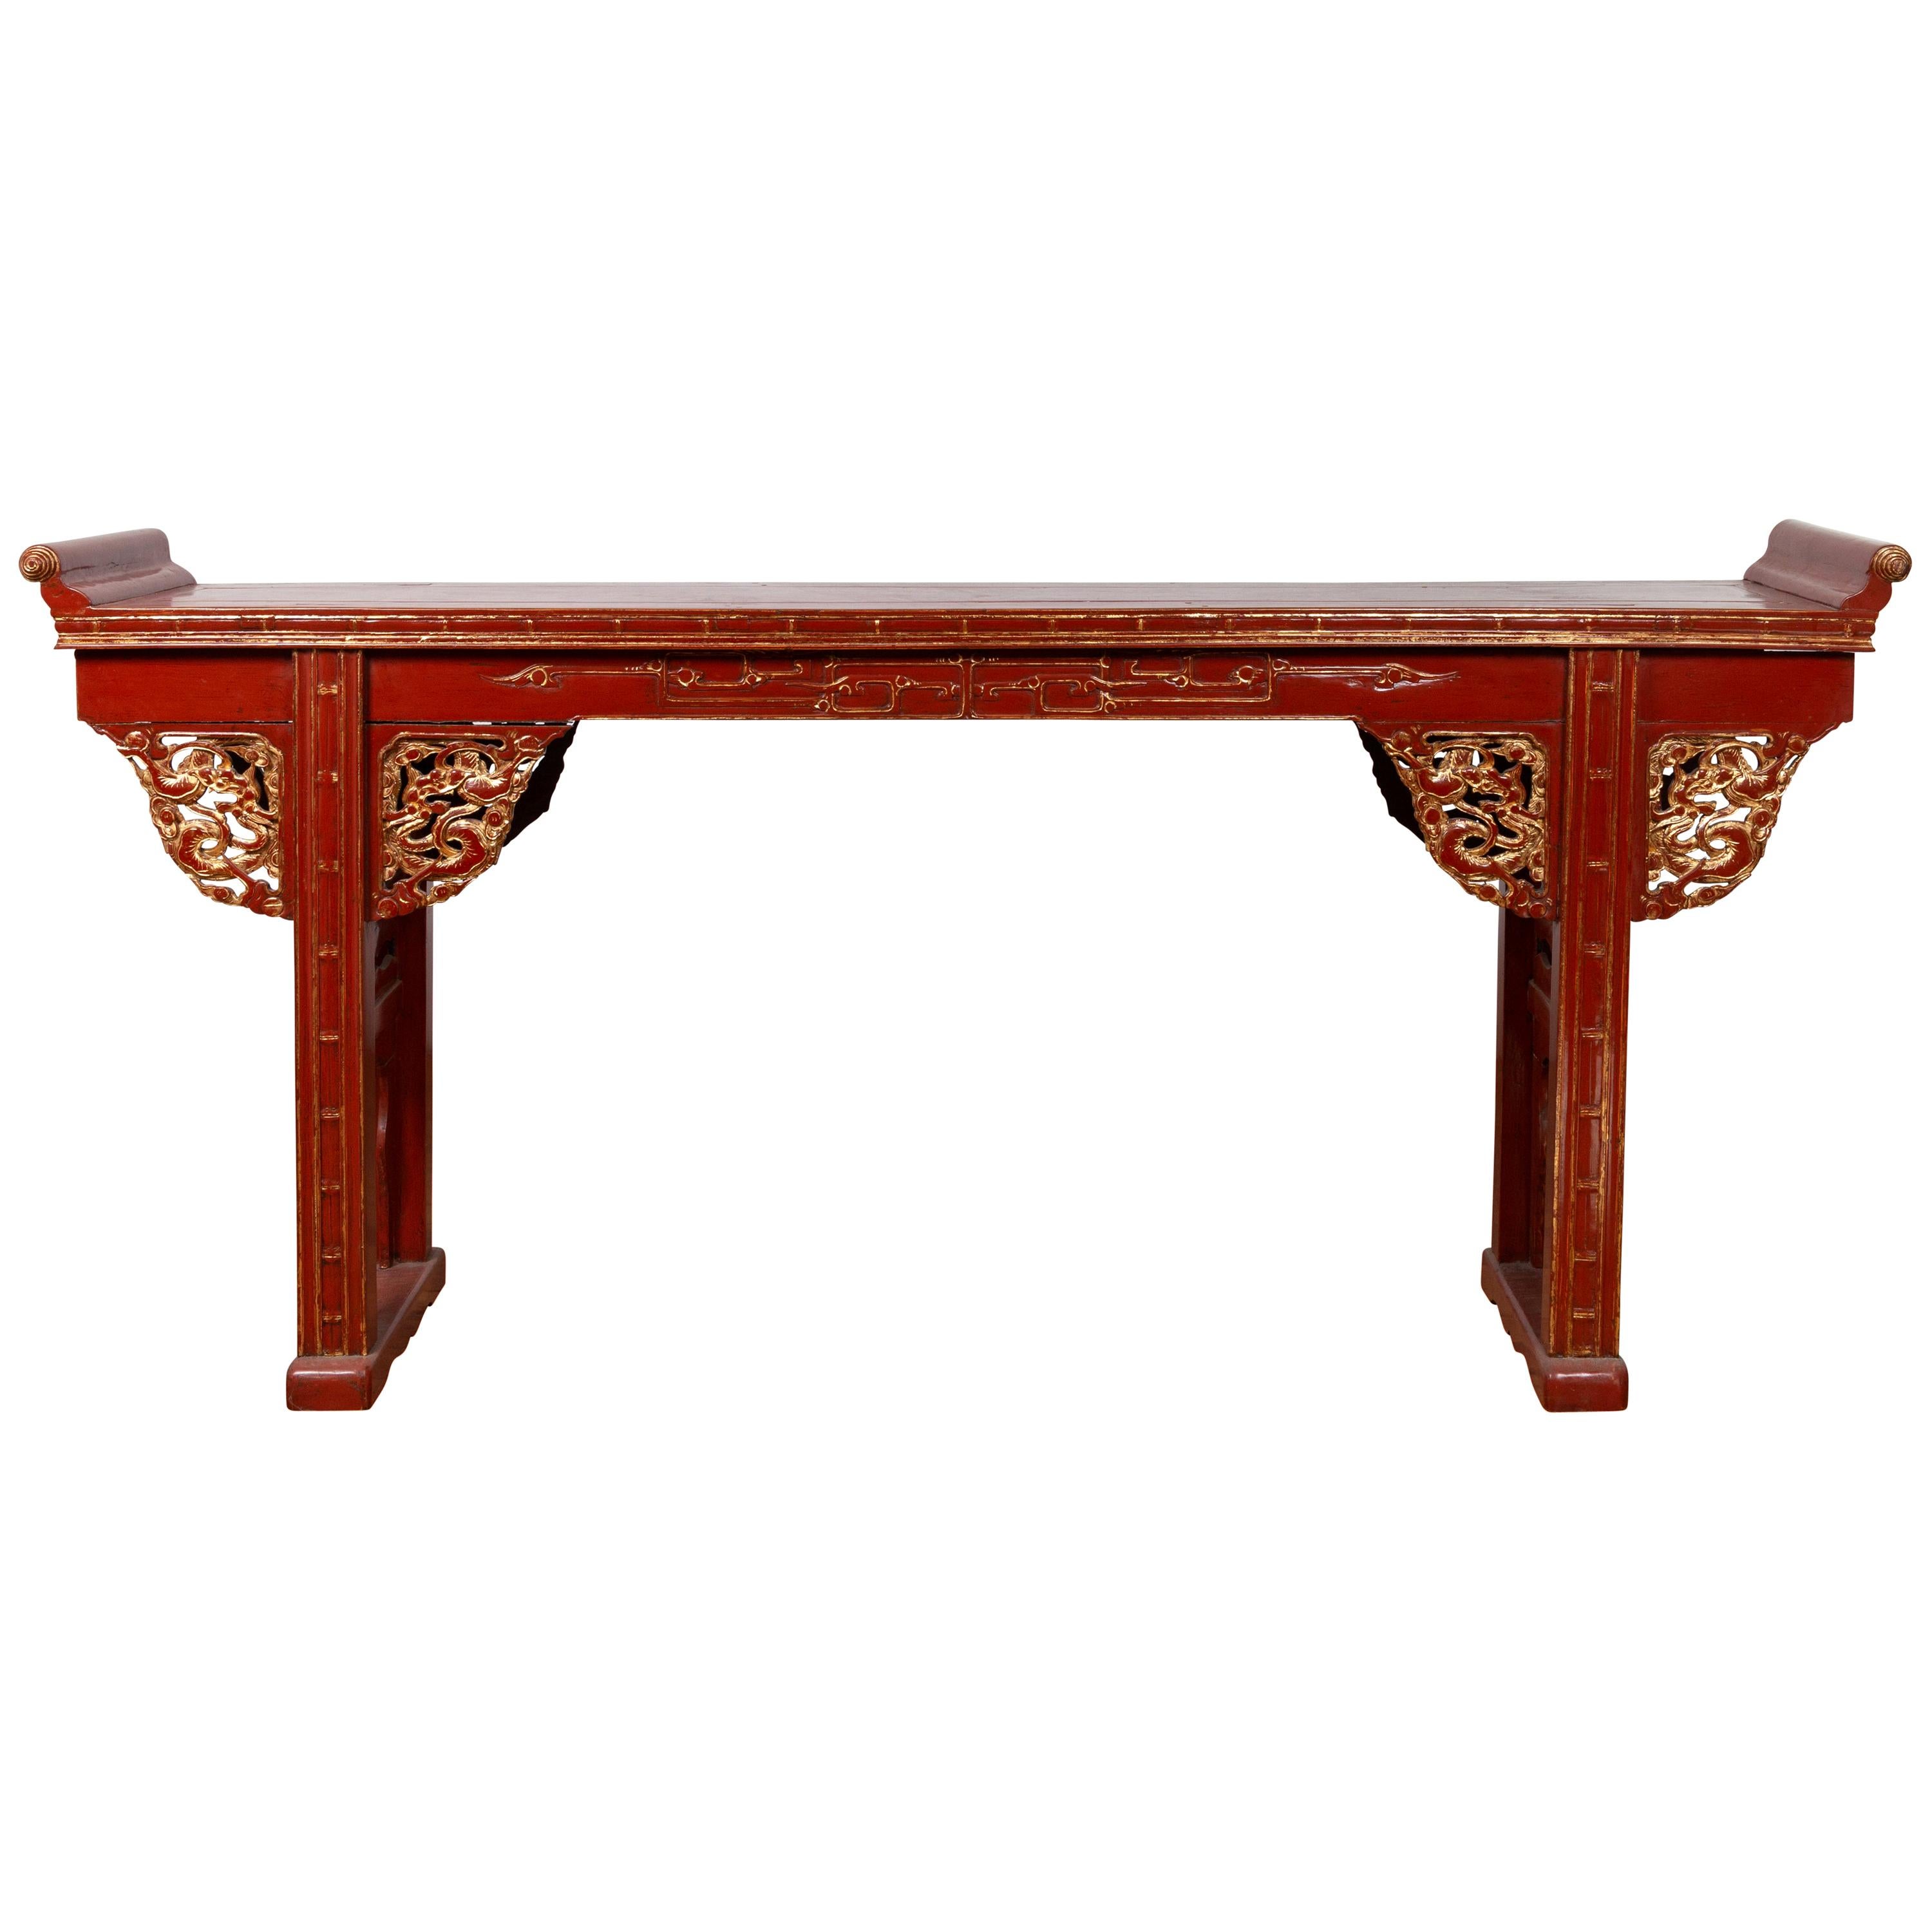 Antique Chinese Red Lacquered Console Table with Gilt Accents and Carved Apron